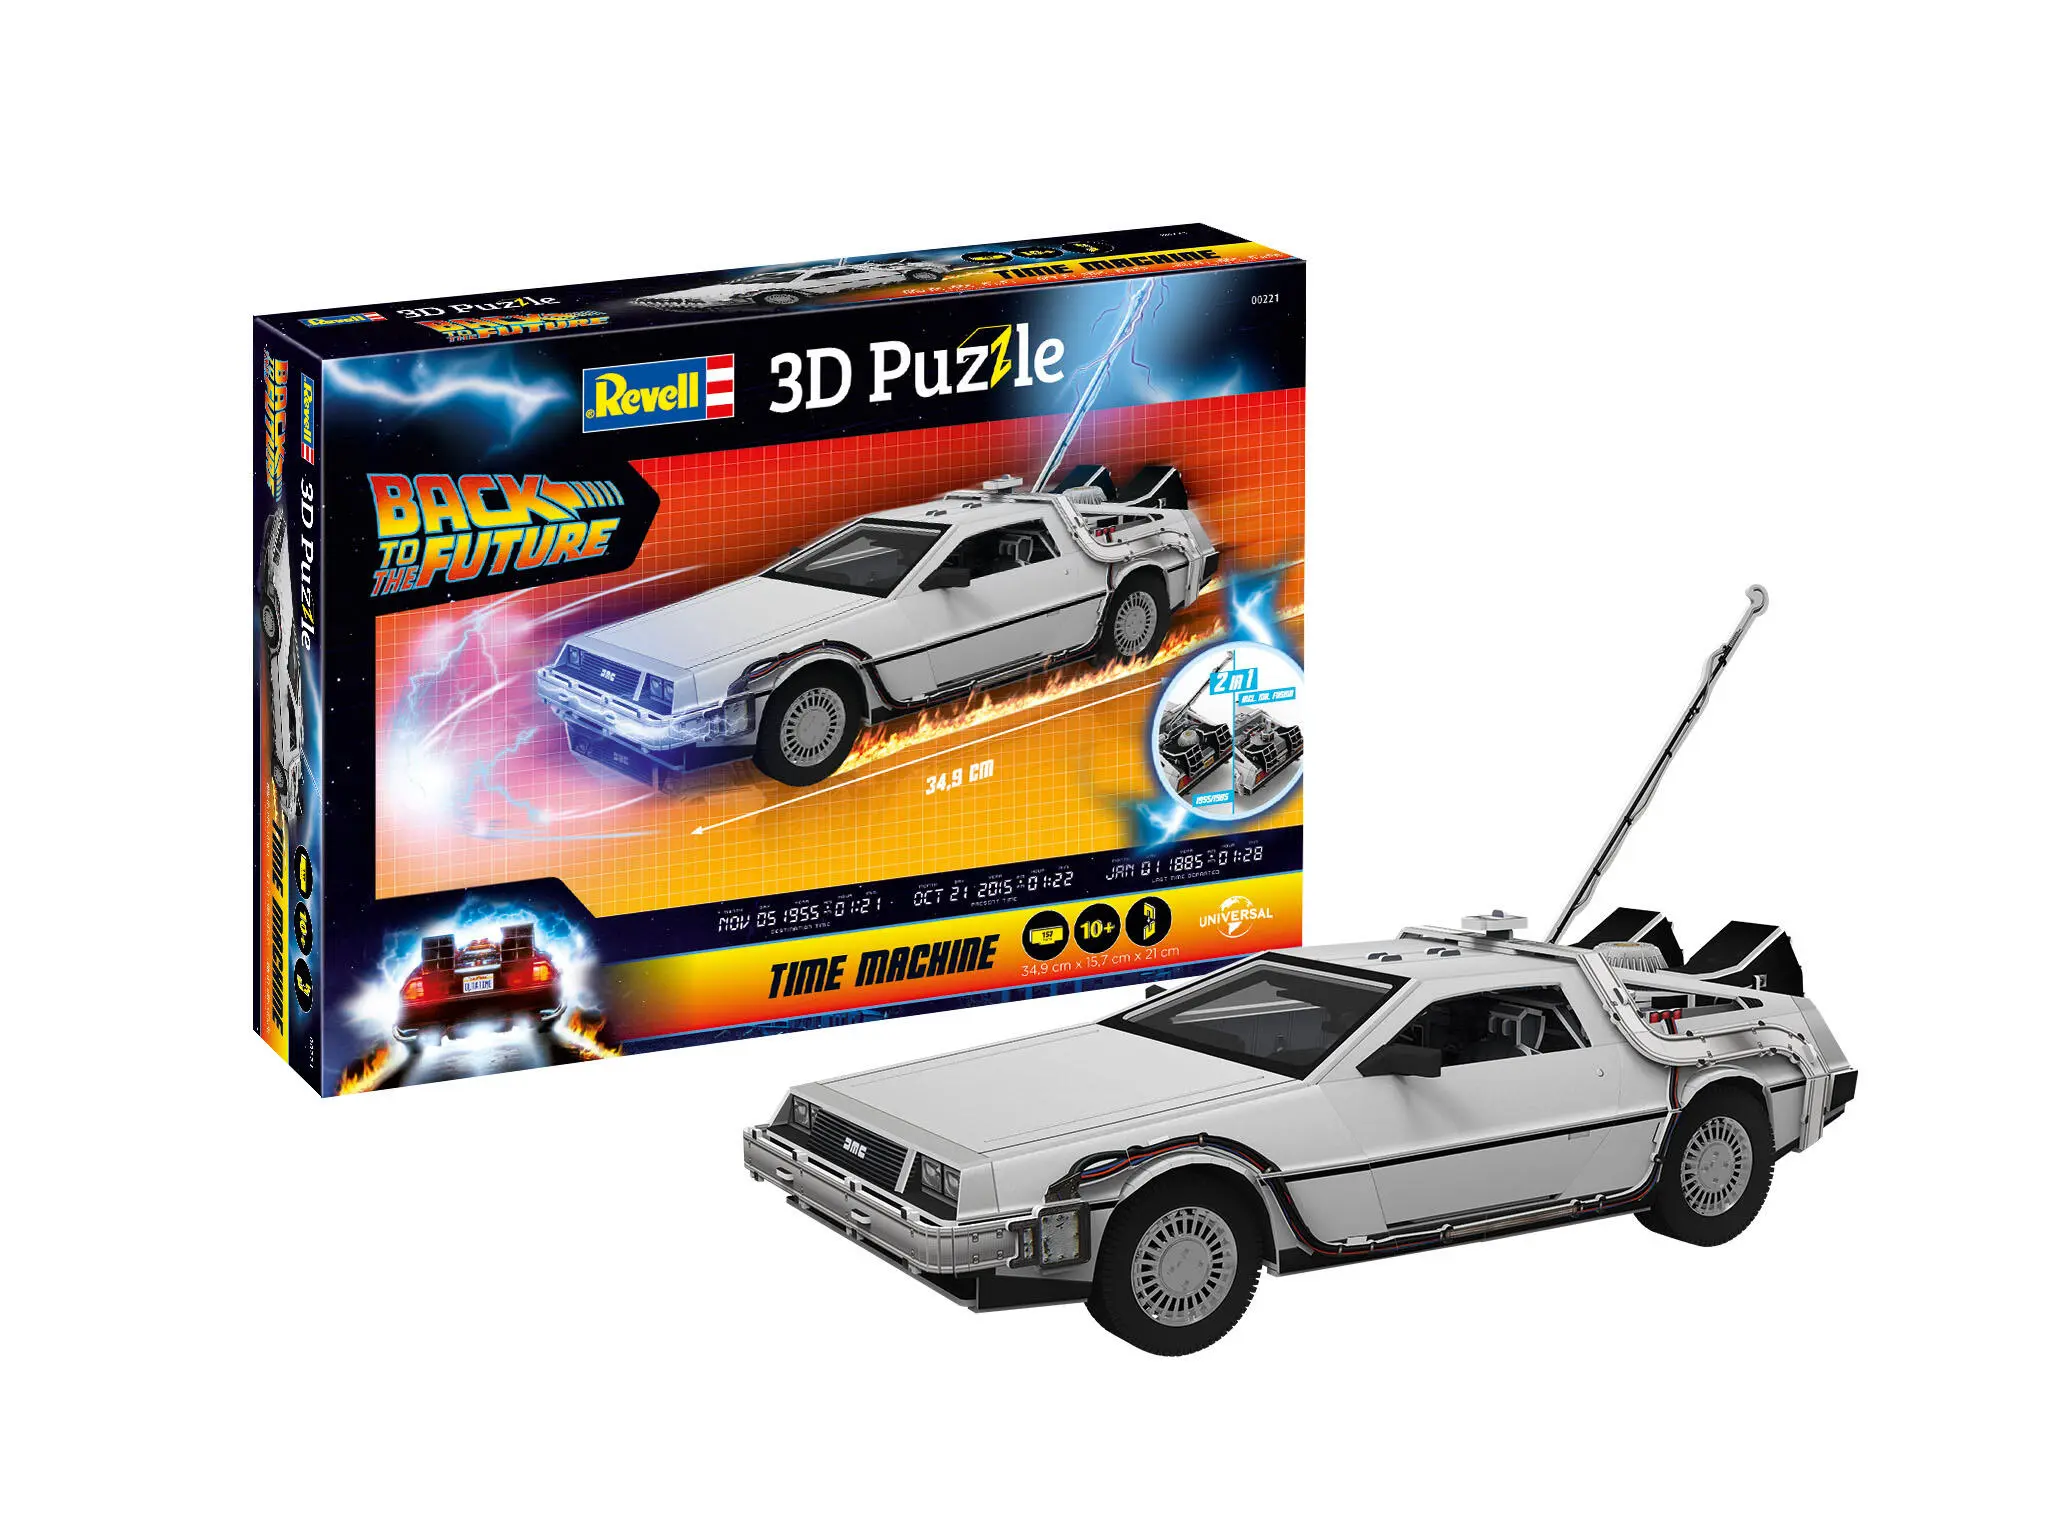 Revell 00221- Time Machine Back to the Future - 3D Puzzle